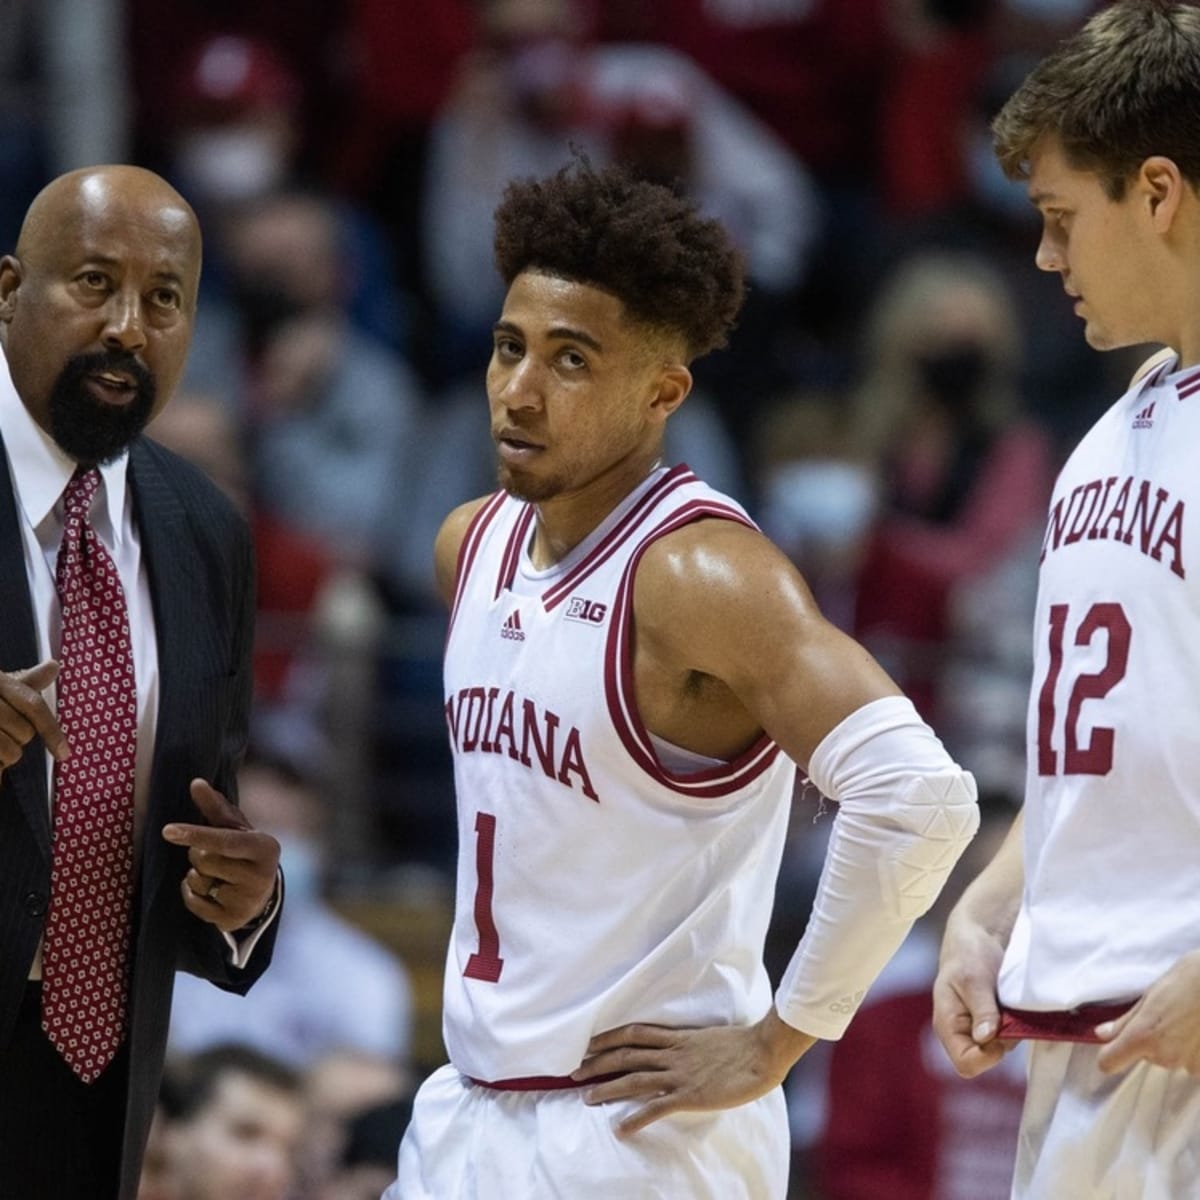 LIVE BLOG: Follow Indiana's NCAA Tournament Game With Wyoming in